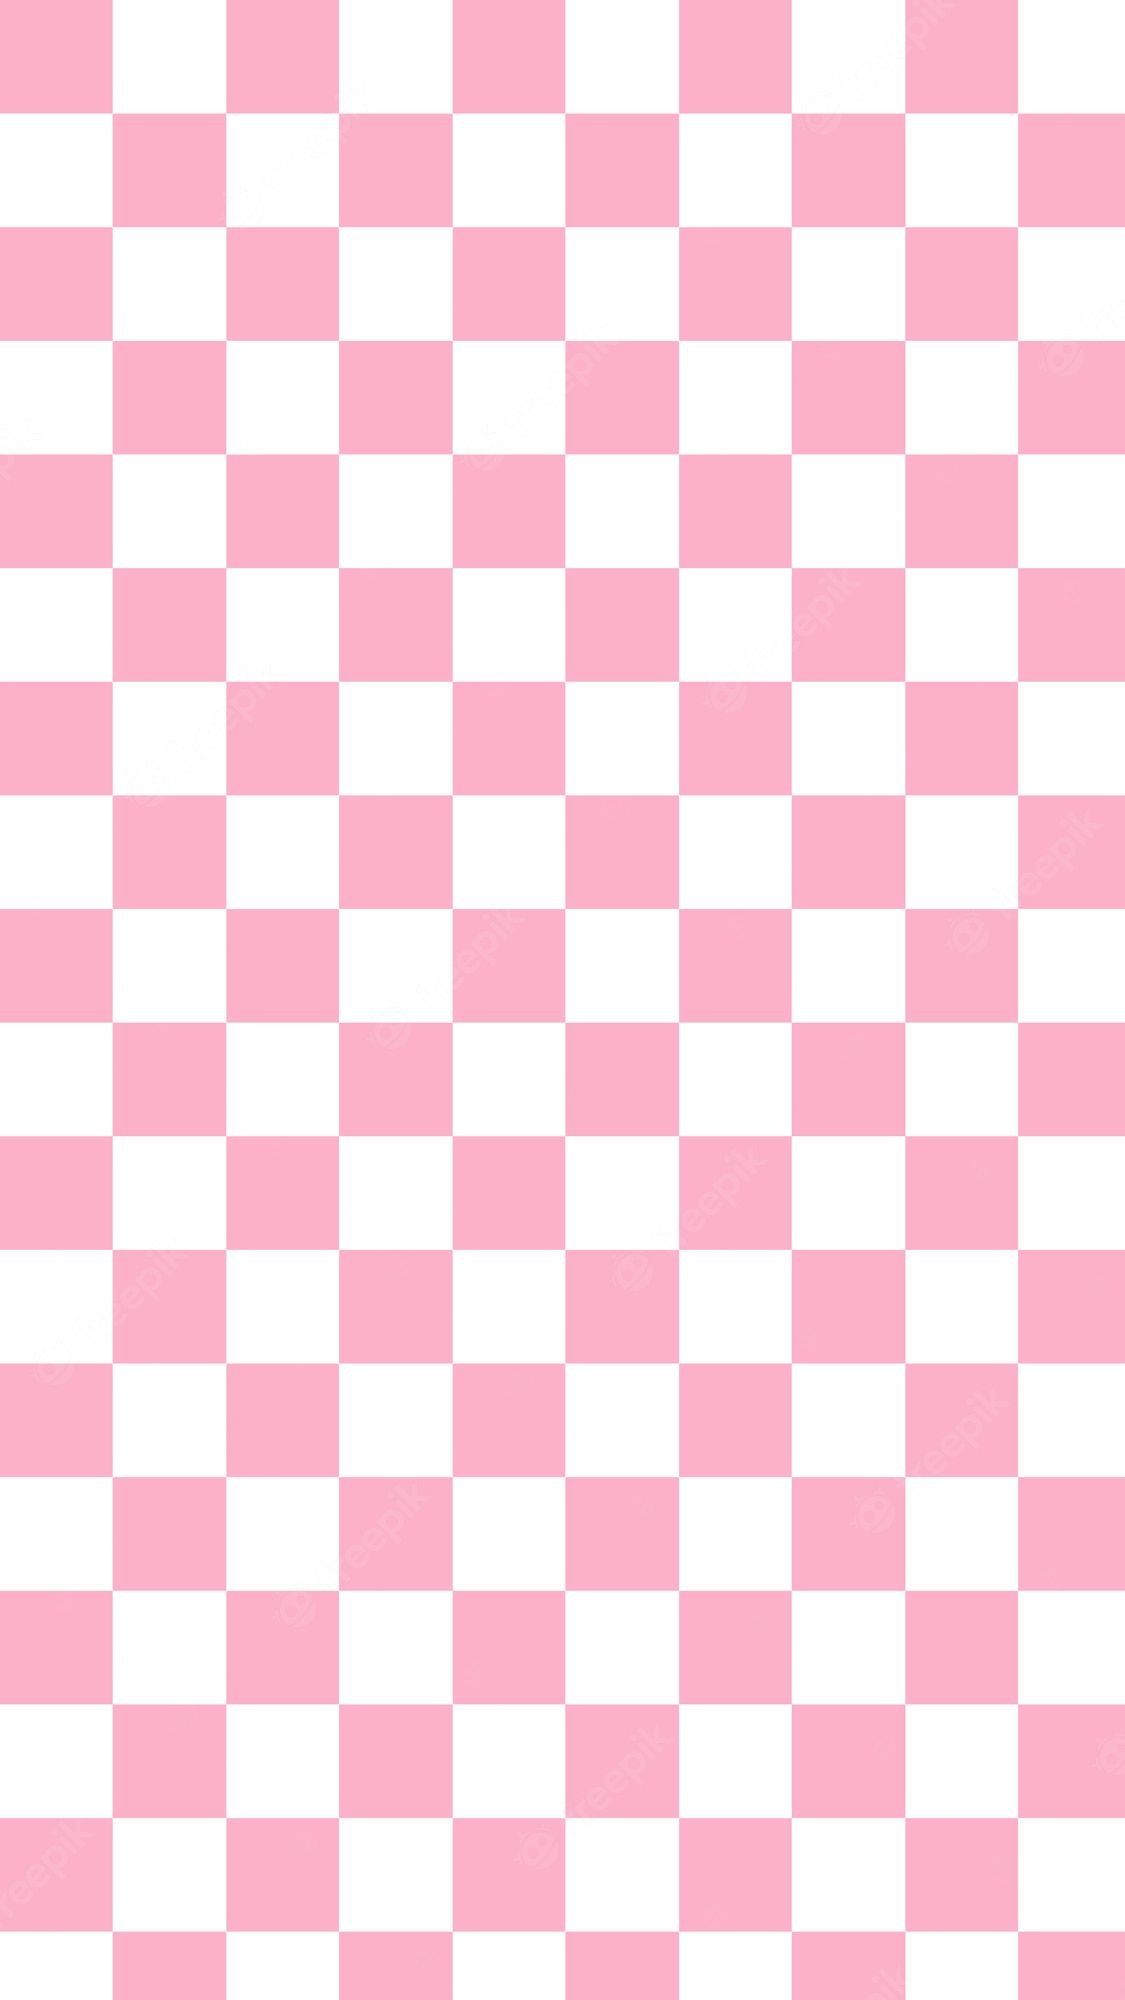 A pink and white checkered pattern - Pastel pink, cute pink, checkered